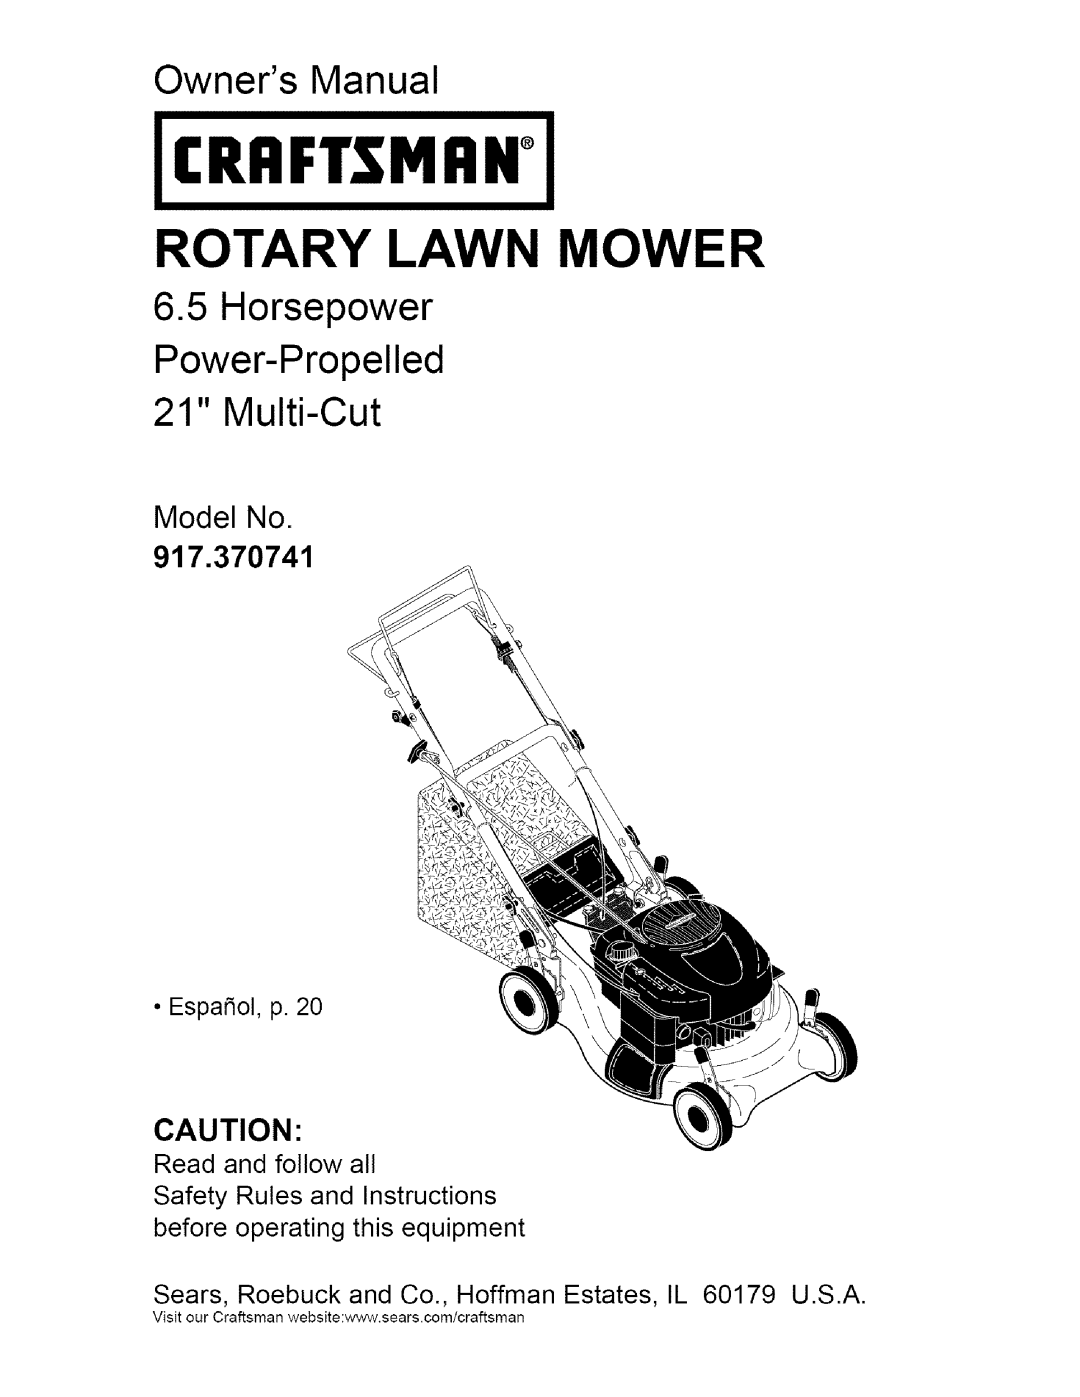 Craftsman 917.370741 owner manual Model No, CRnFTSMFIN, Rotary Lawn Mower, Horsepower, Owners Manual 